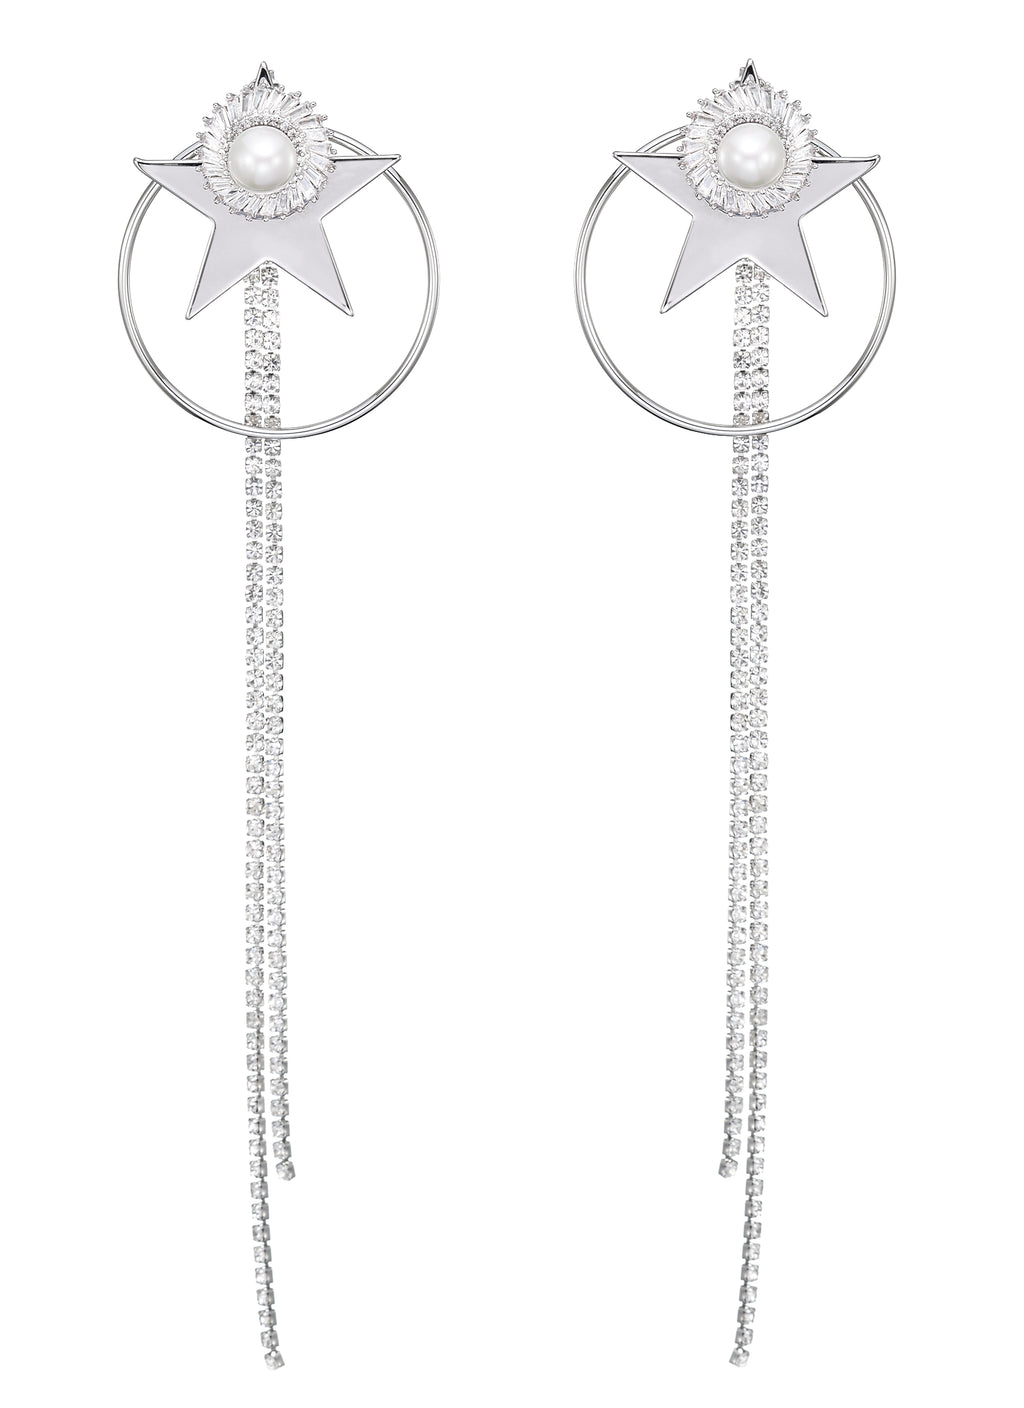 DETACHABLE GLASS CRYSTAL BLOSSOM WITH PEARL STAR FRINGE DROP EARRINGS